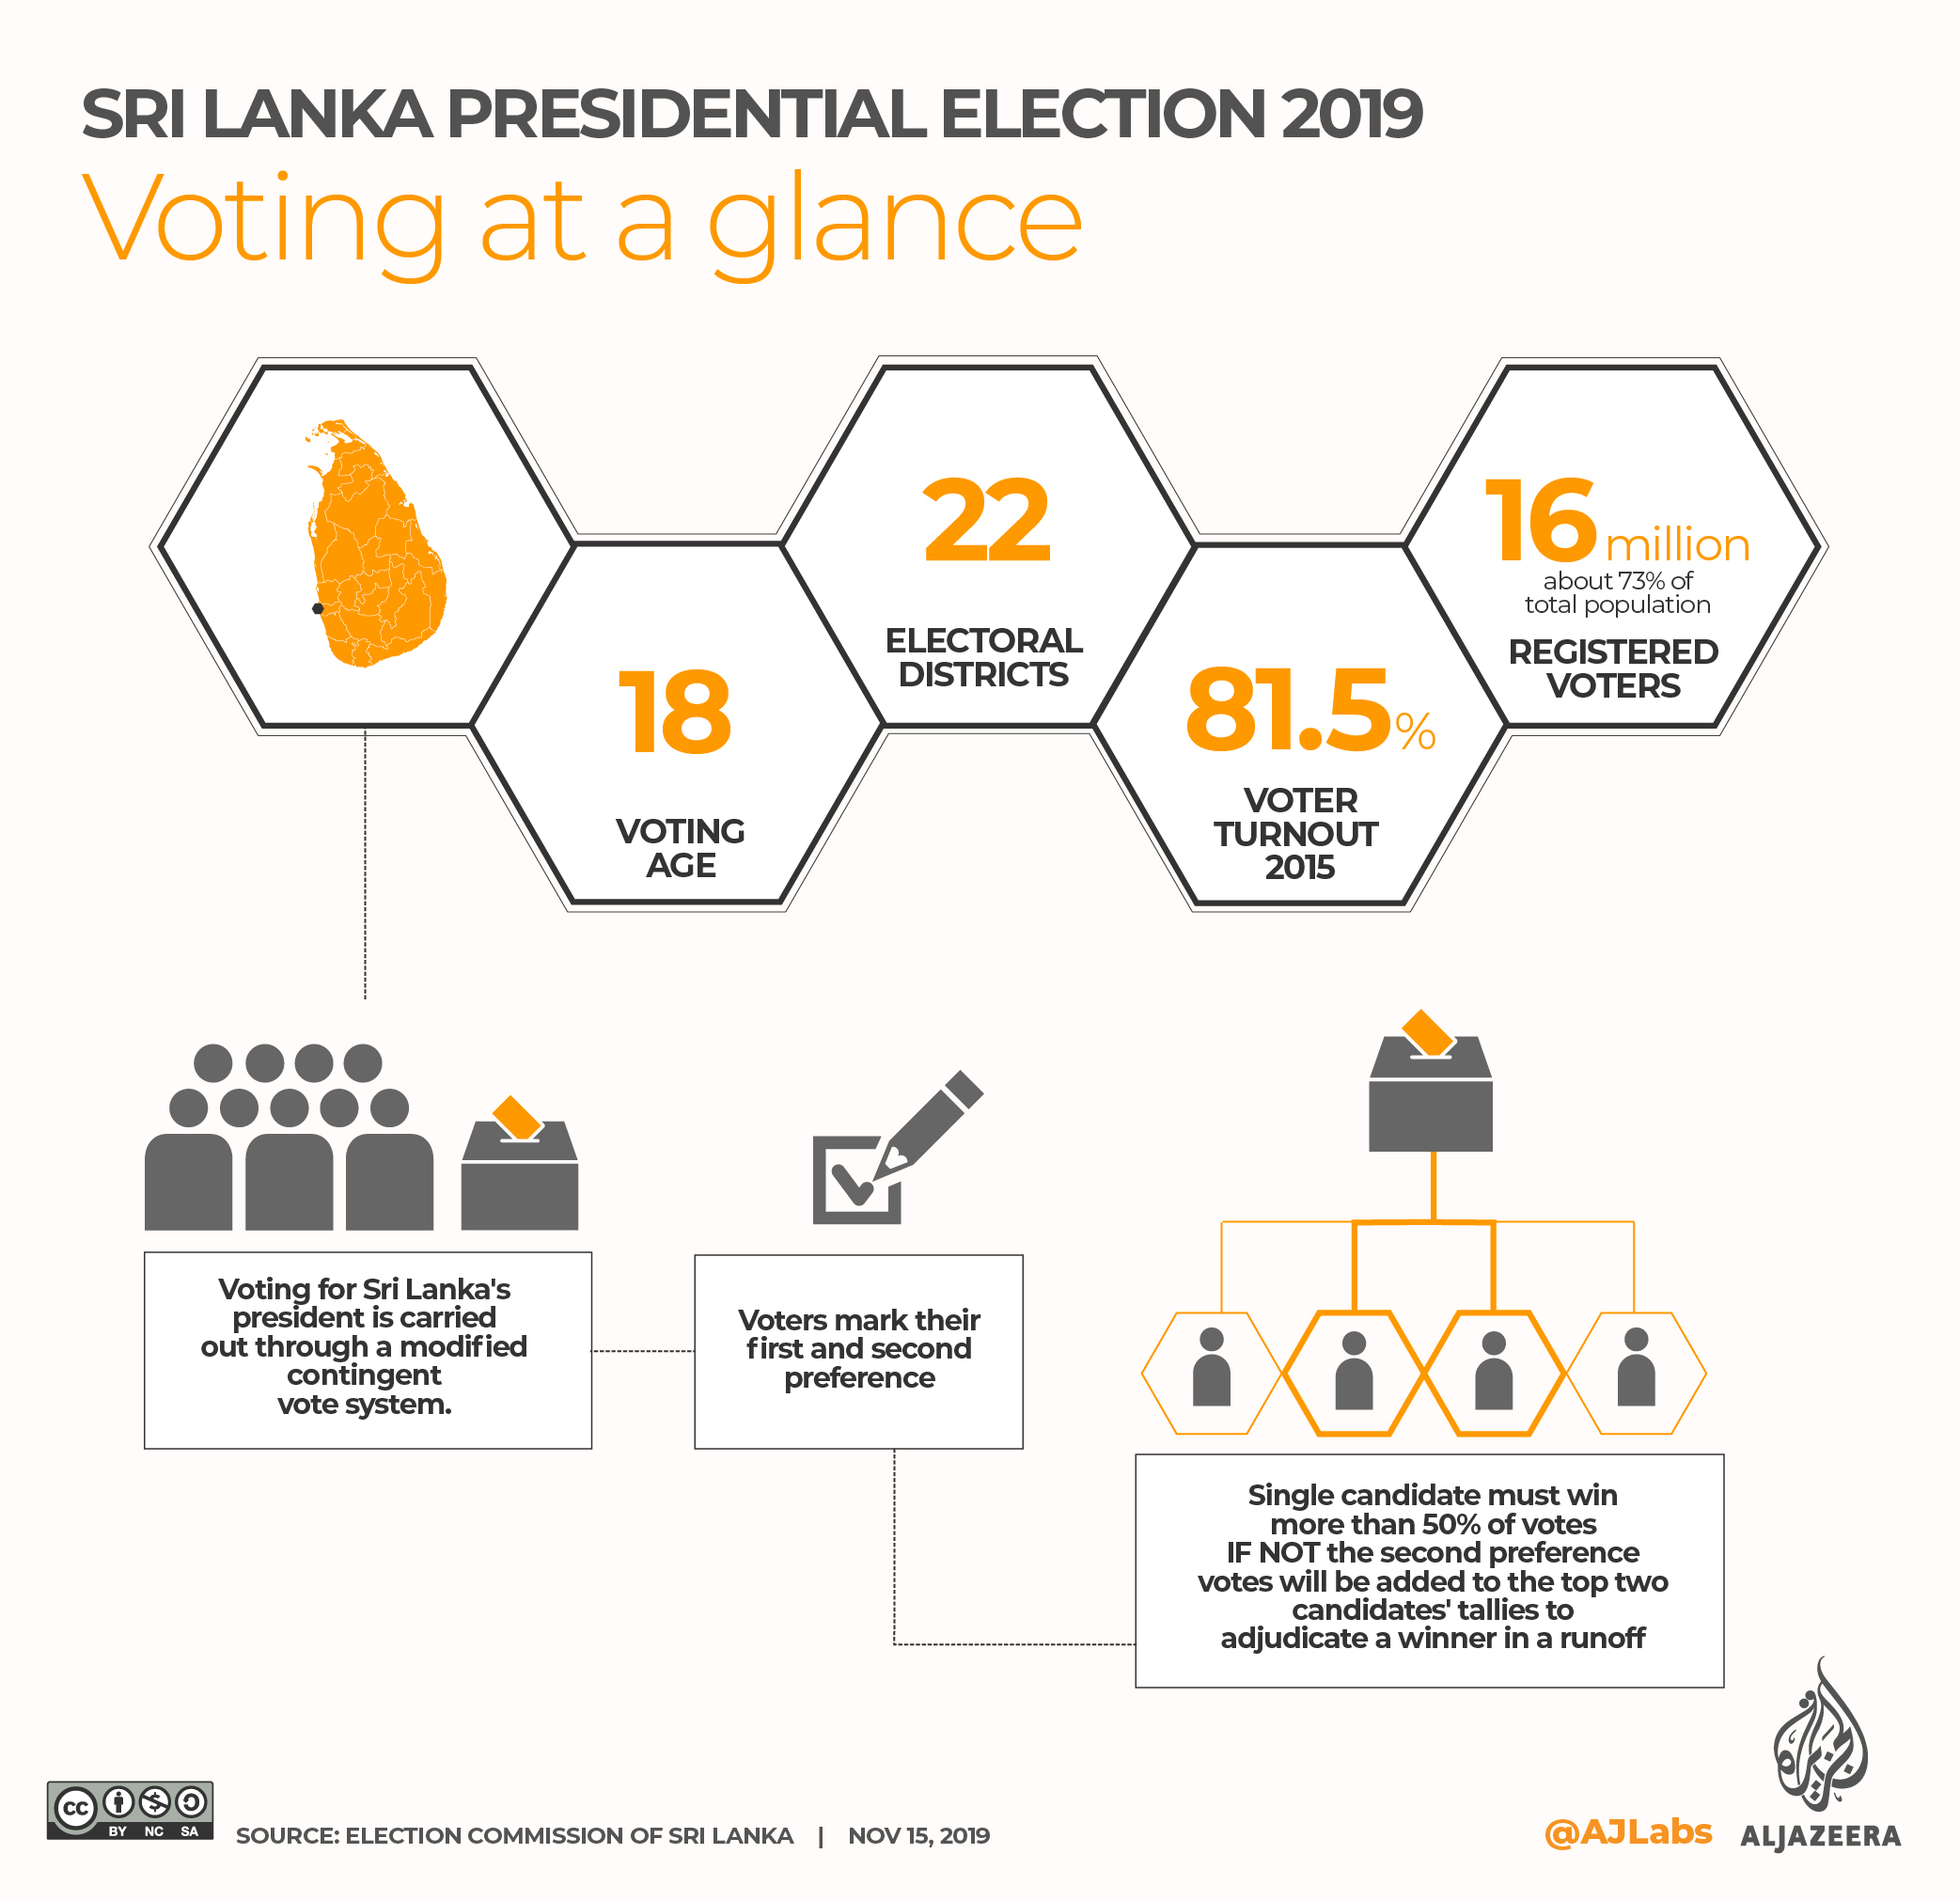 INTERACTIVE: SRI LANKA PRESIDENTIAL ELECTION 2019 - Voting at a glance